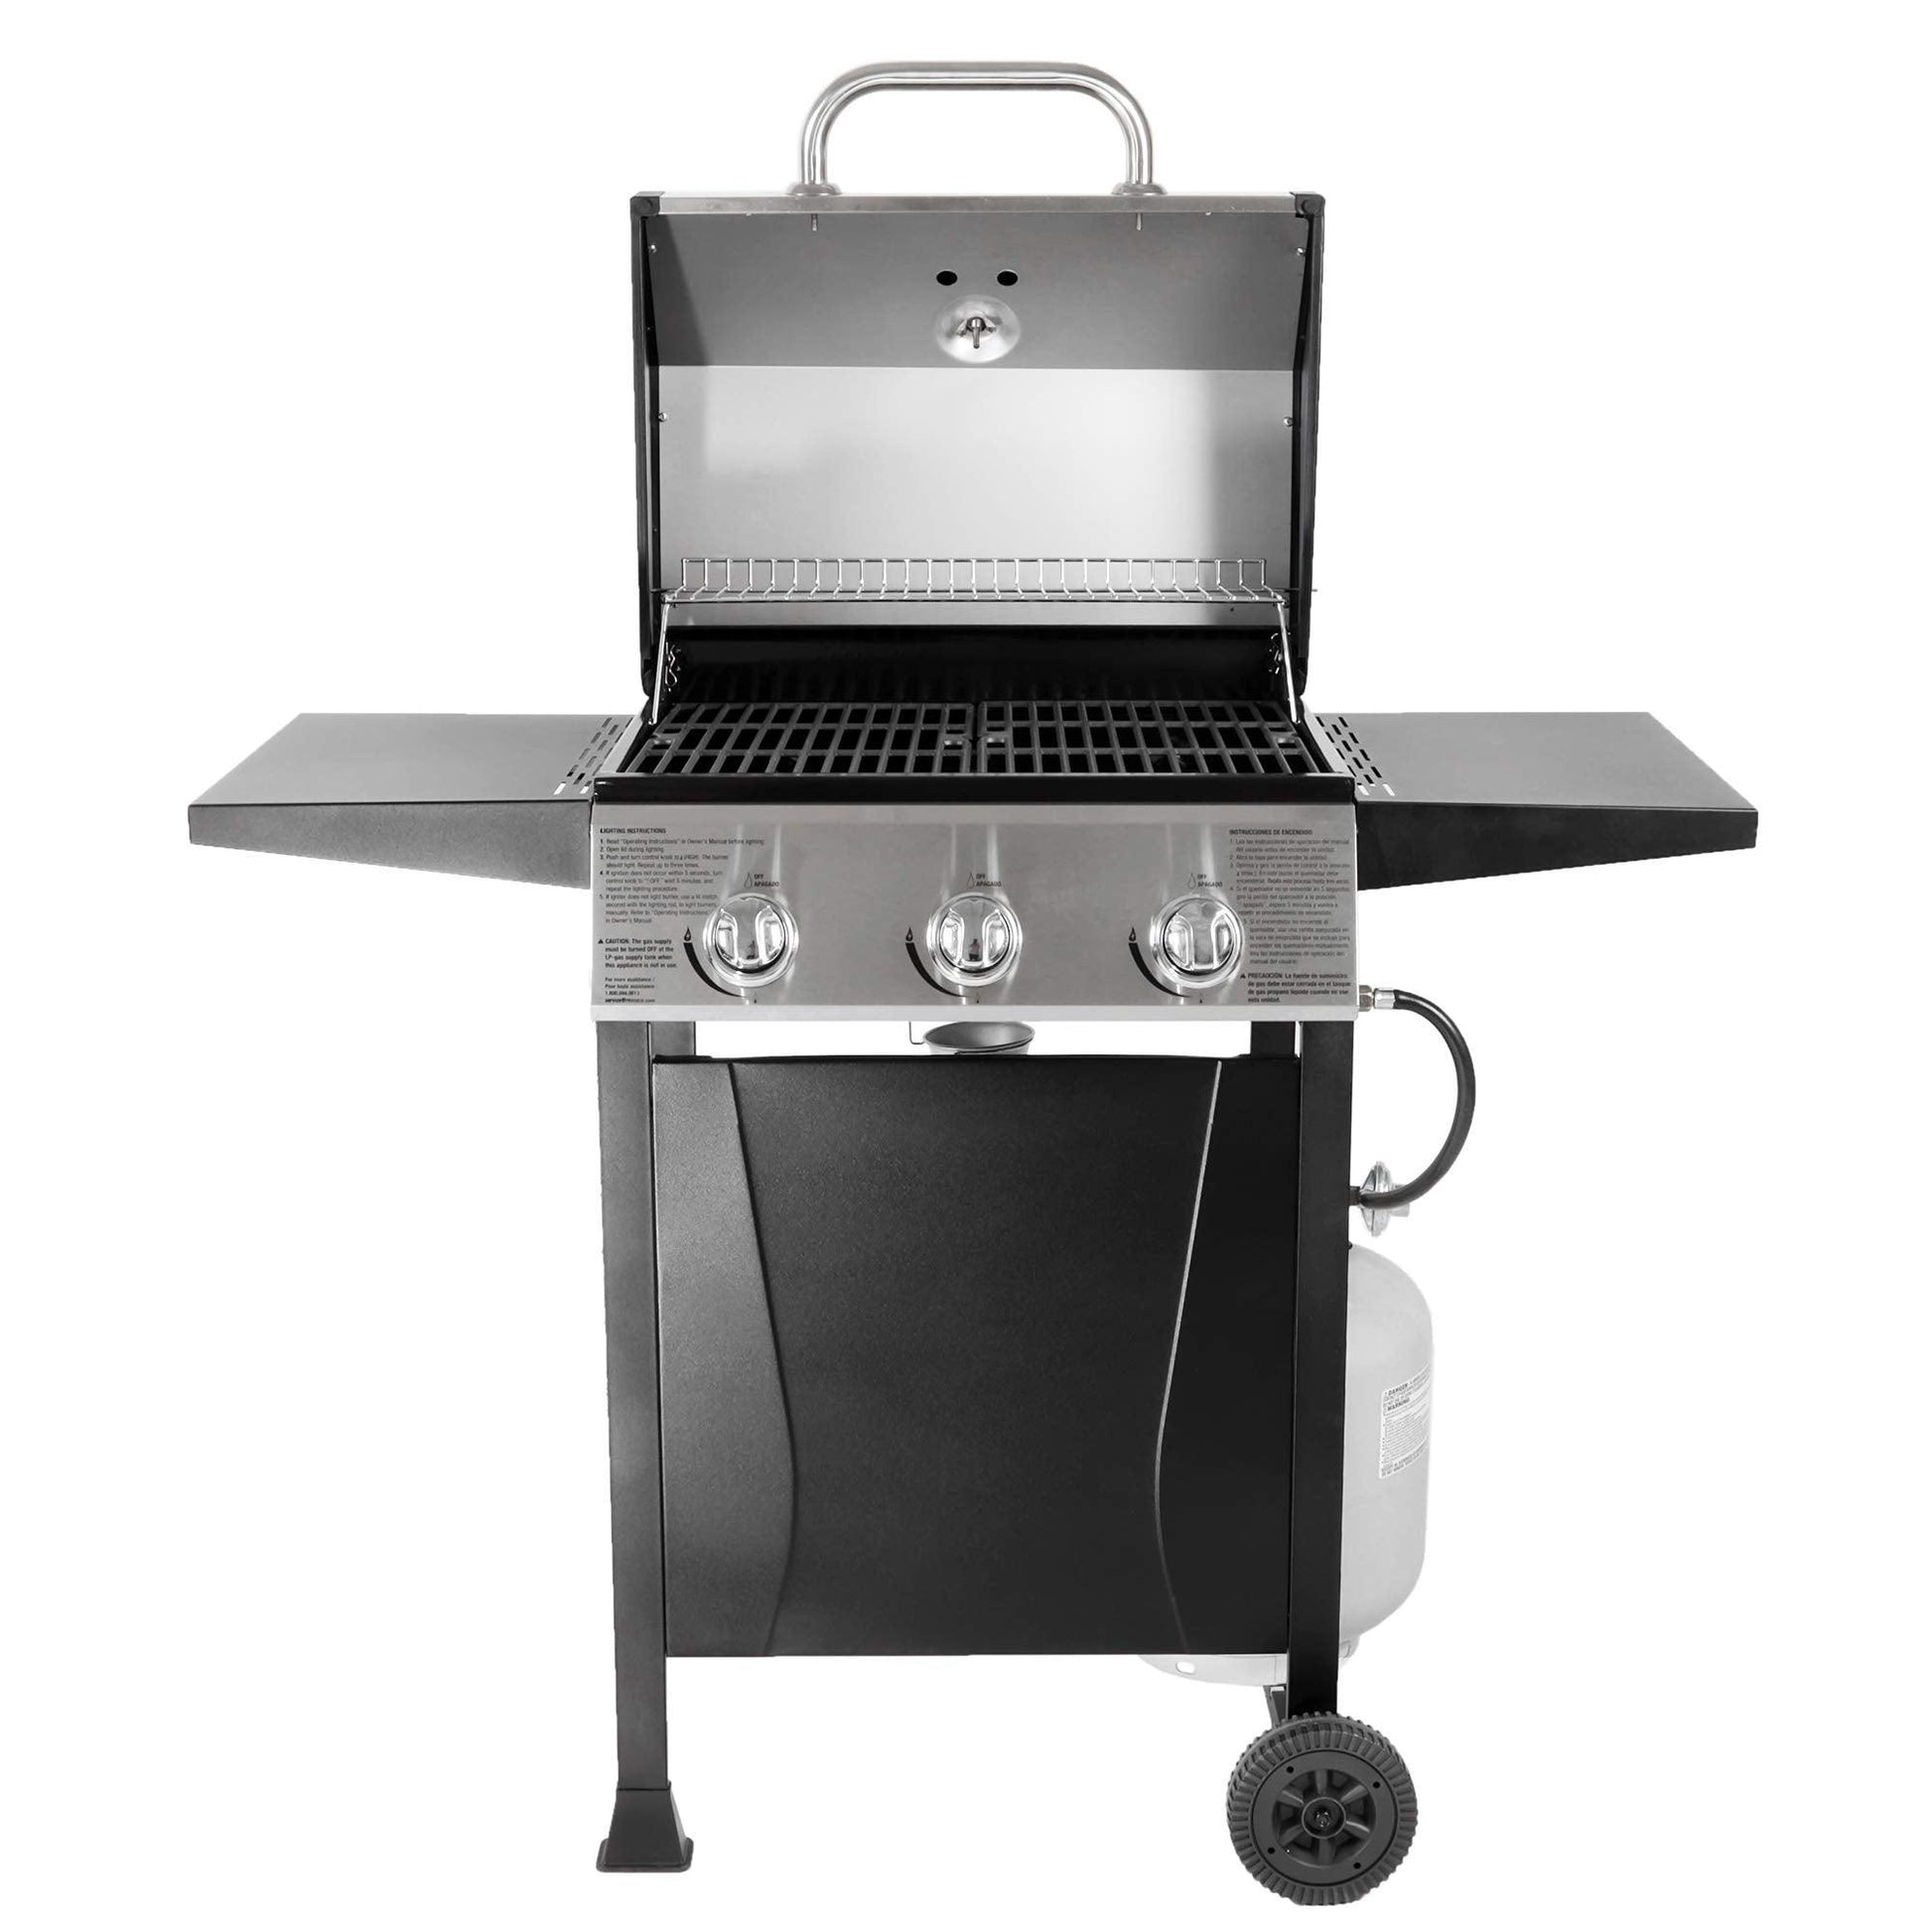 Grill Boss Outdoor Barbeque 3 Burner Propane Gas Grill for Barbecue Cooking with Top Cover Lid, Wheels, and Side Storage Shelves, Black - CookCave